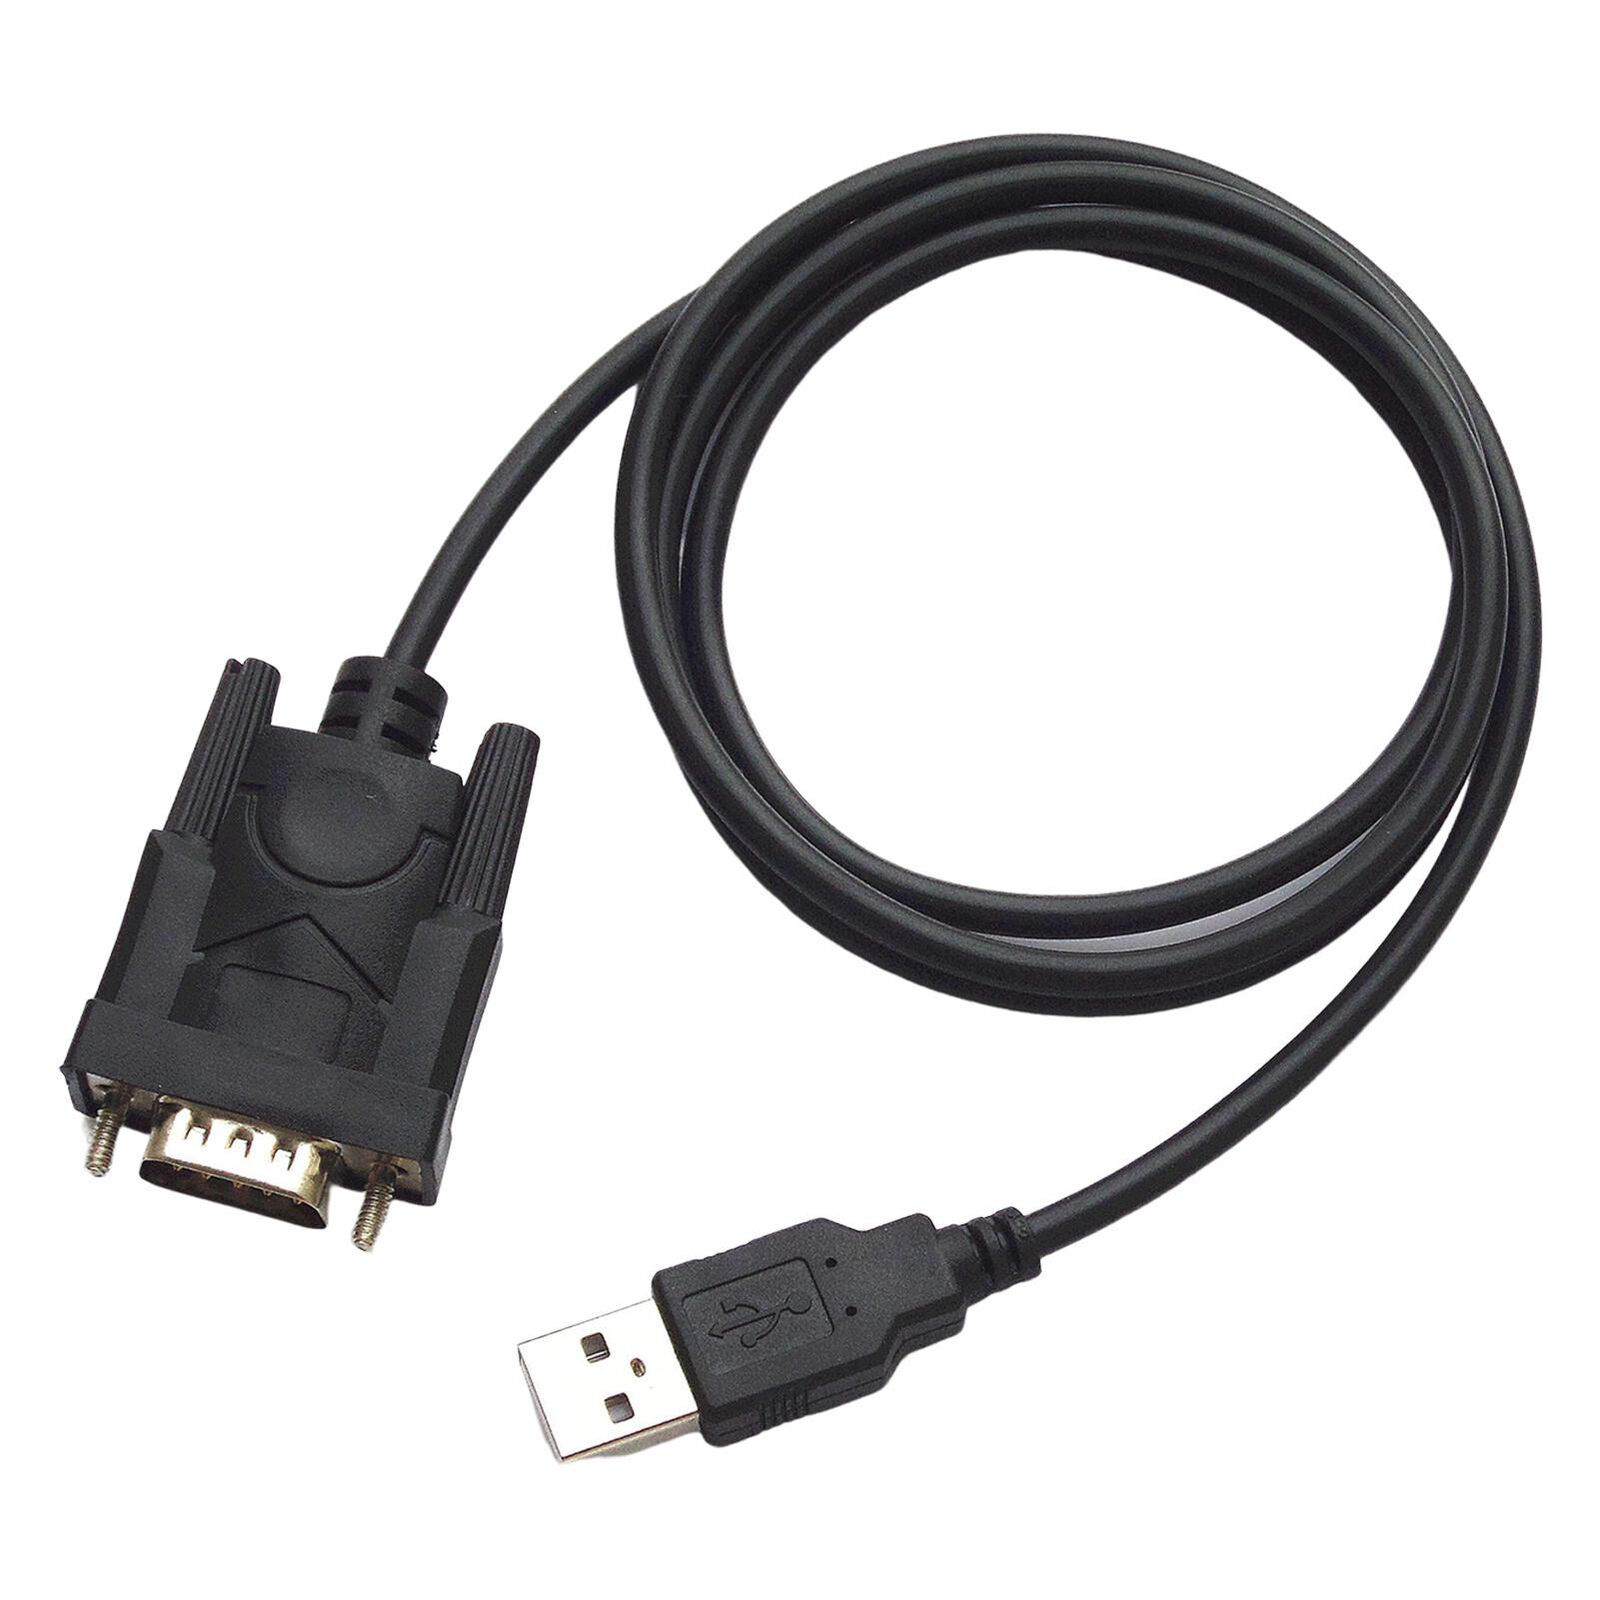 Adapters USB to Converter Cable USB 2.0 Male to RS232 Female DB9 Converter 